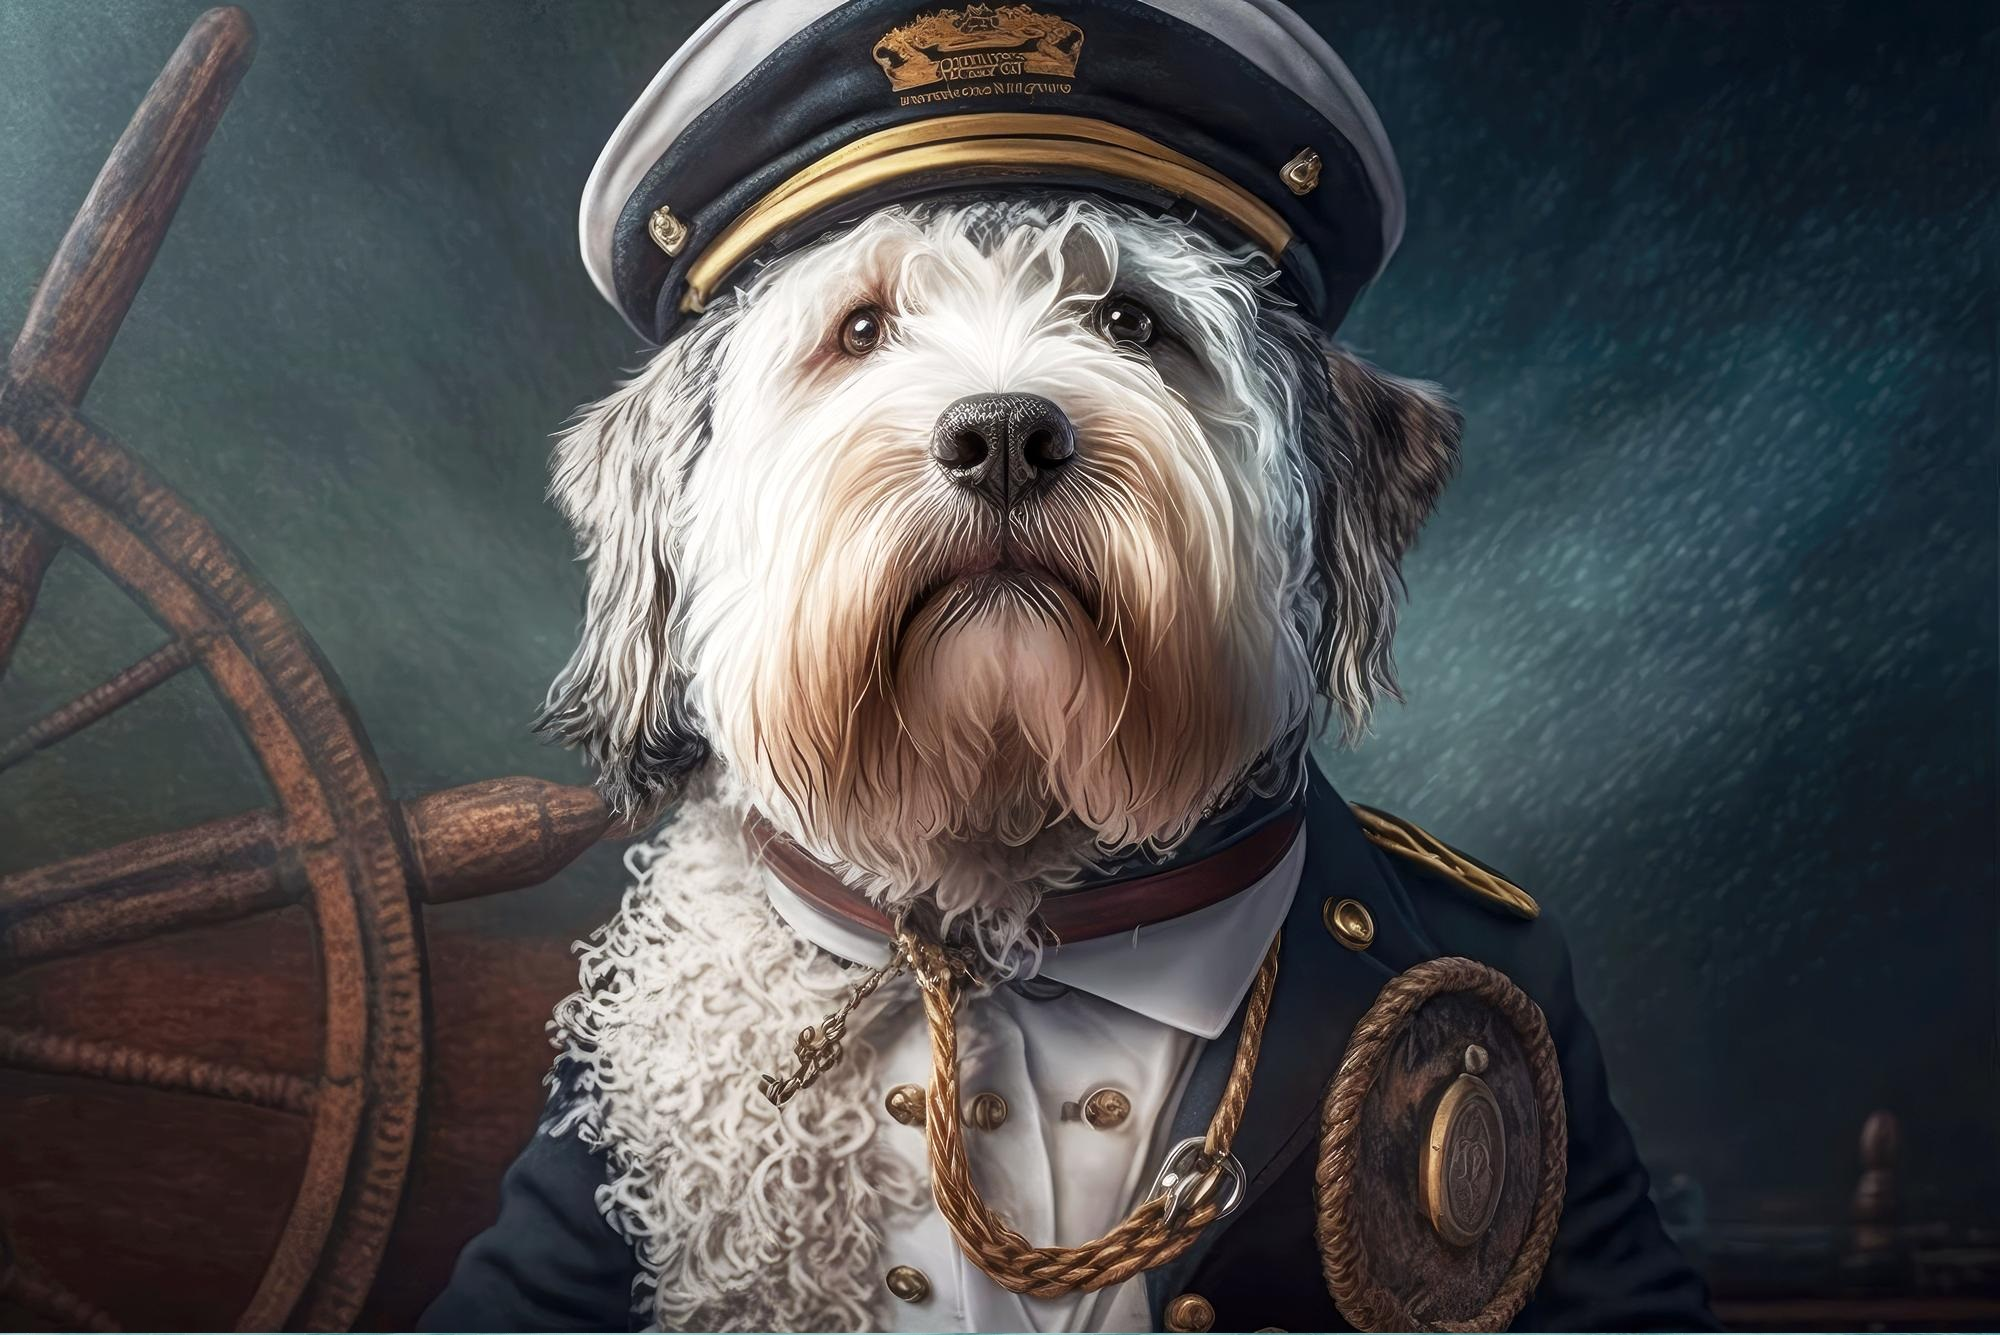 Our four legged friends can be sailors too